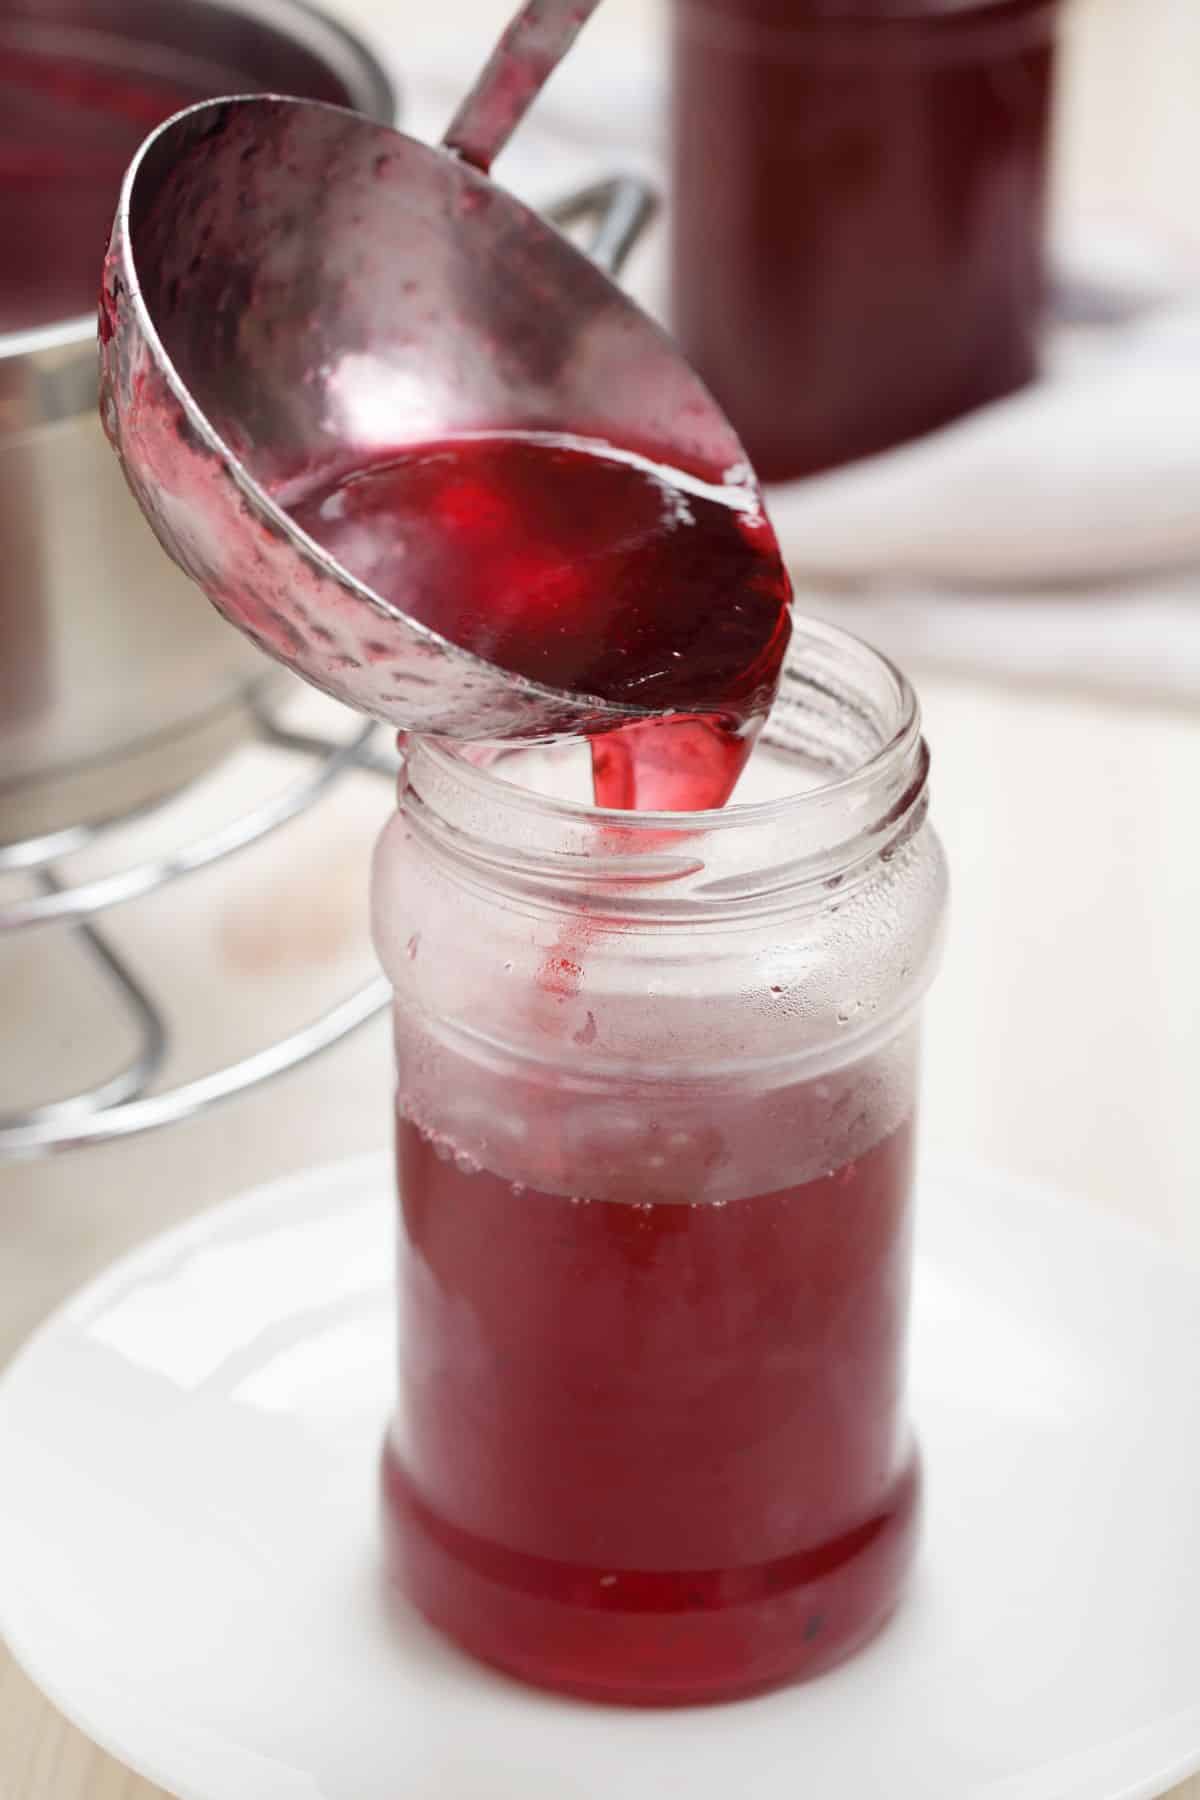 Ladling jelly into a jar